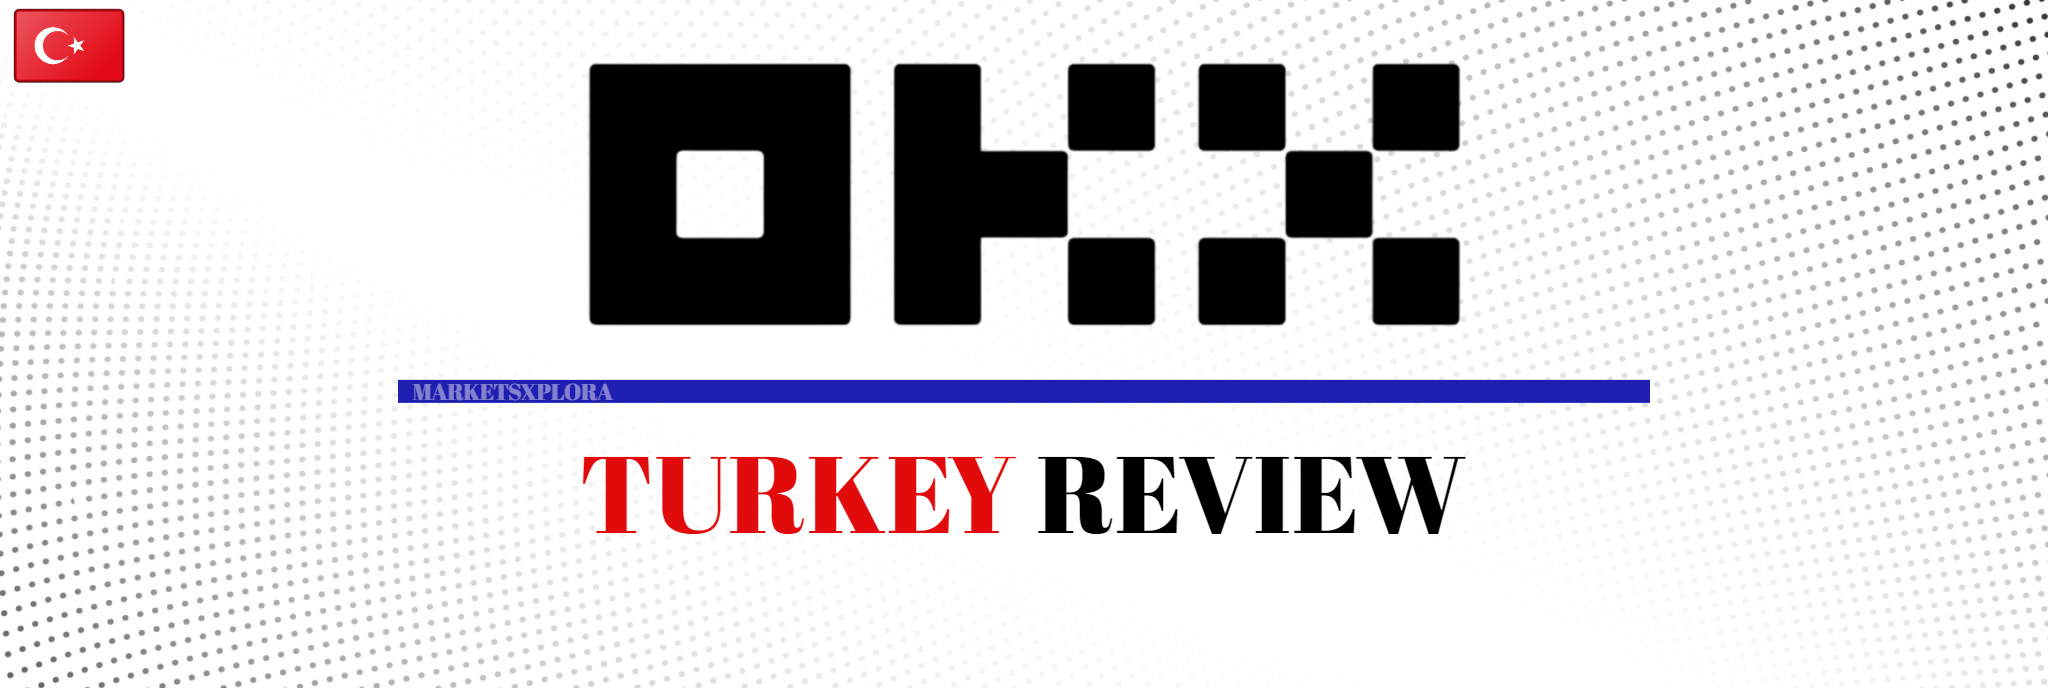 This in-depth OKX Turkey review covers everything local crypto traders need to know from licenses, fees and TRY deposit options to security and support service levels before using this global exchange.